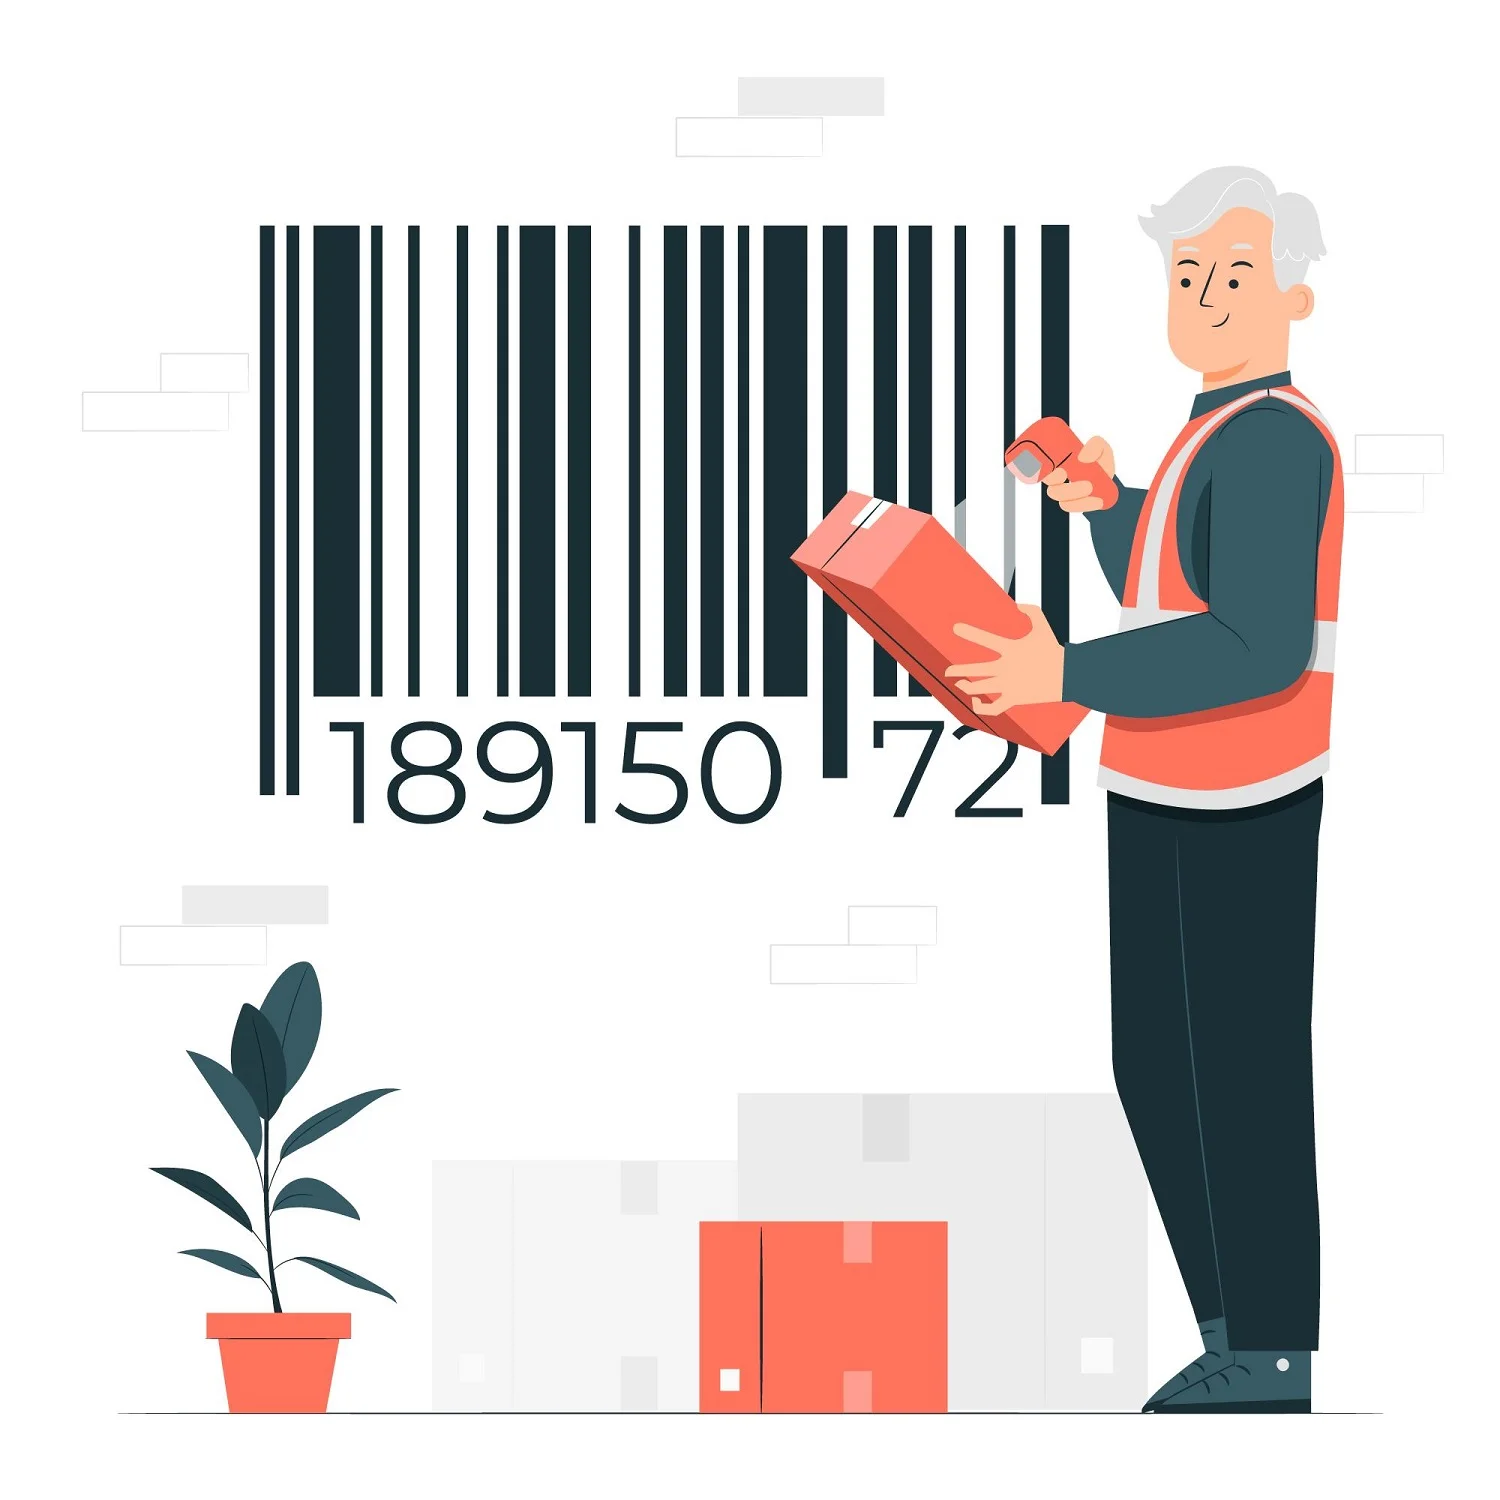 Serial Number Tracking: A Comprehensive Guide for Small Business Owners